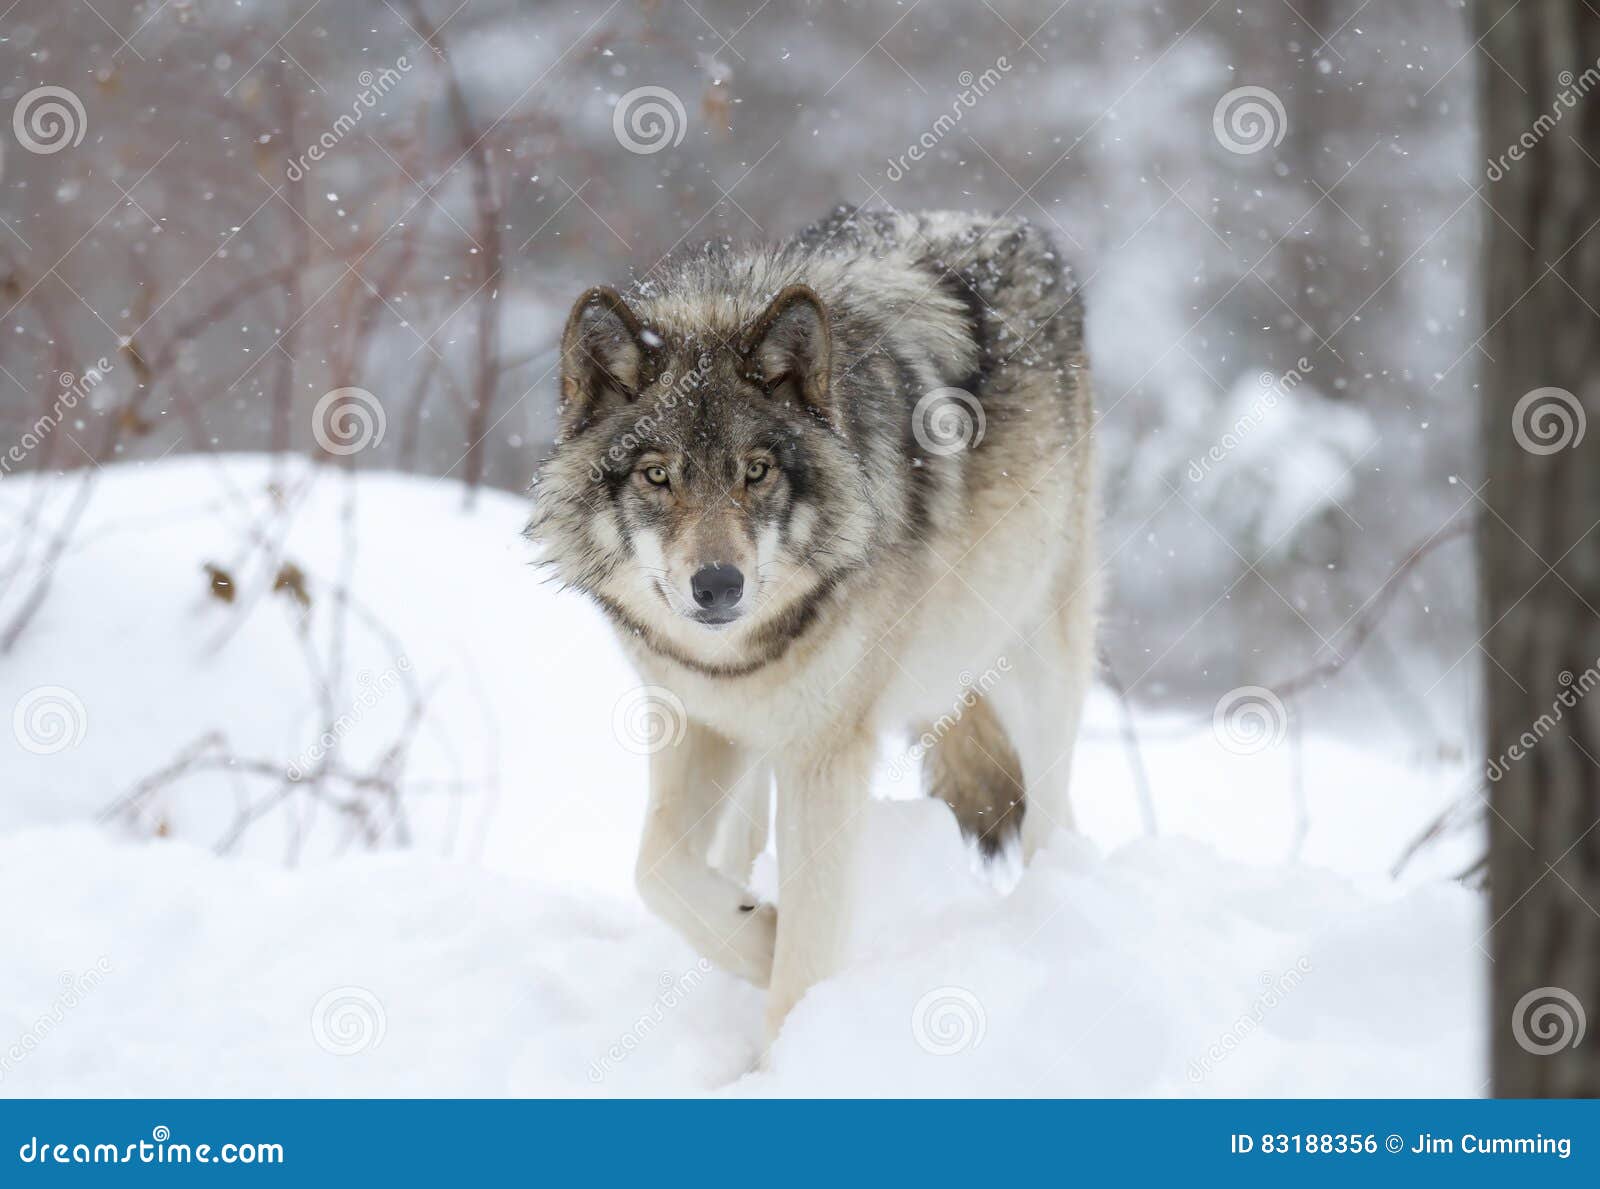 a lone timber wolf or grey wolf (canis lupus) walking in the winter snow in canada